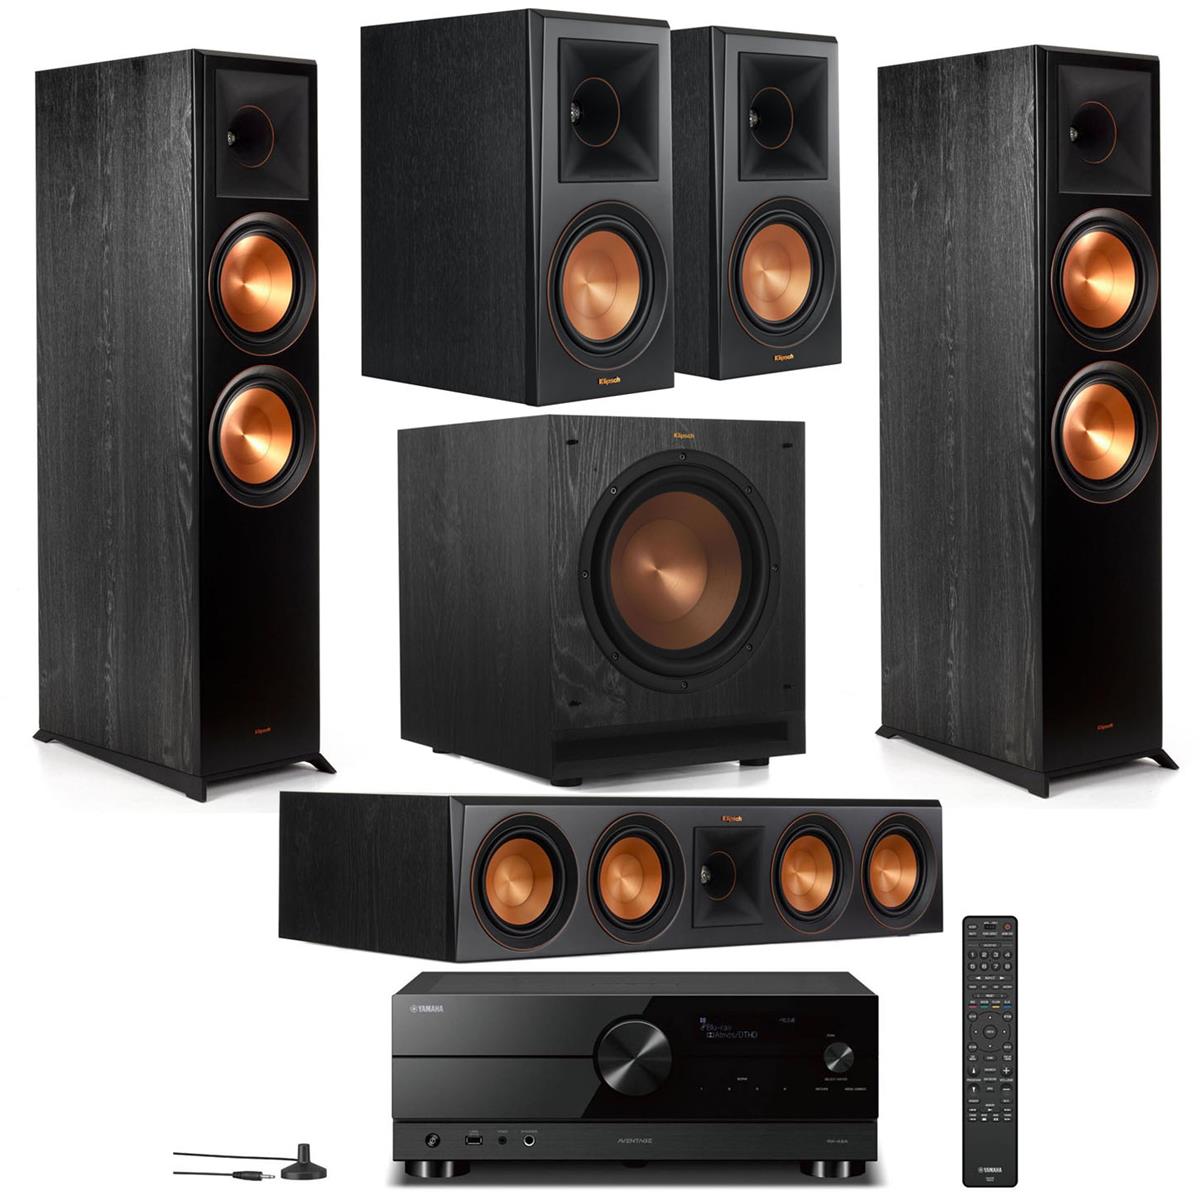 Klipsch Reference Premiere Speakers: 2x RP-8000F + 2x RP-600M + RP-504C + SPL-100 Sub + Yamaha RX-A2A Receiver $2299 + free s/h